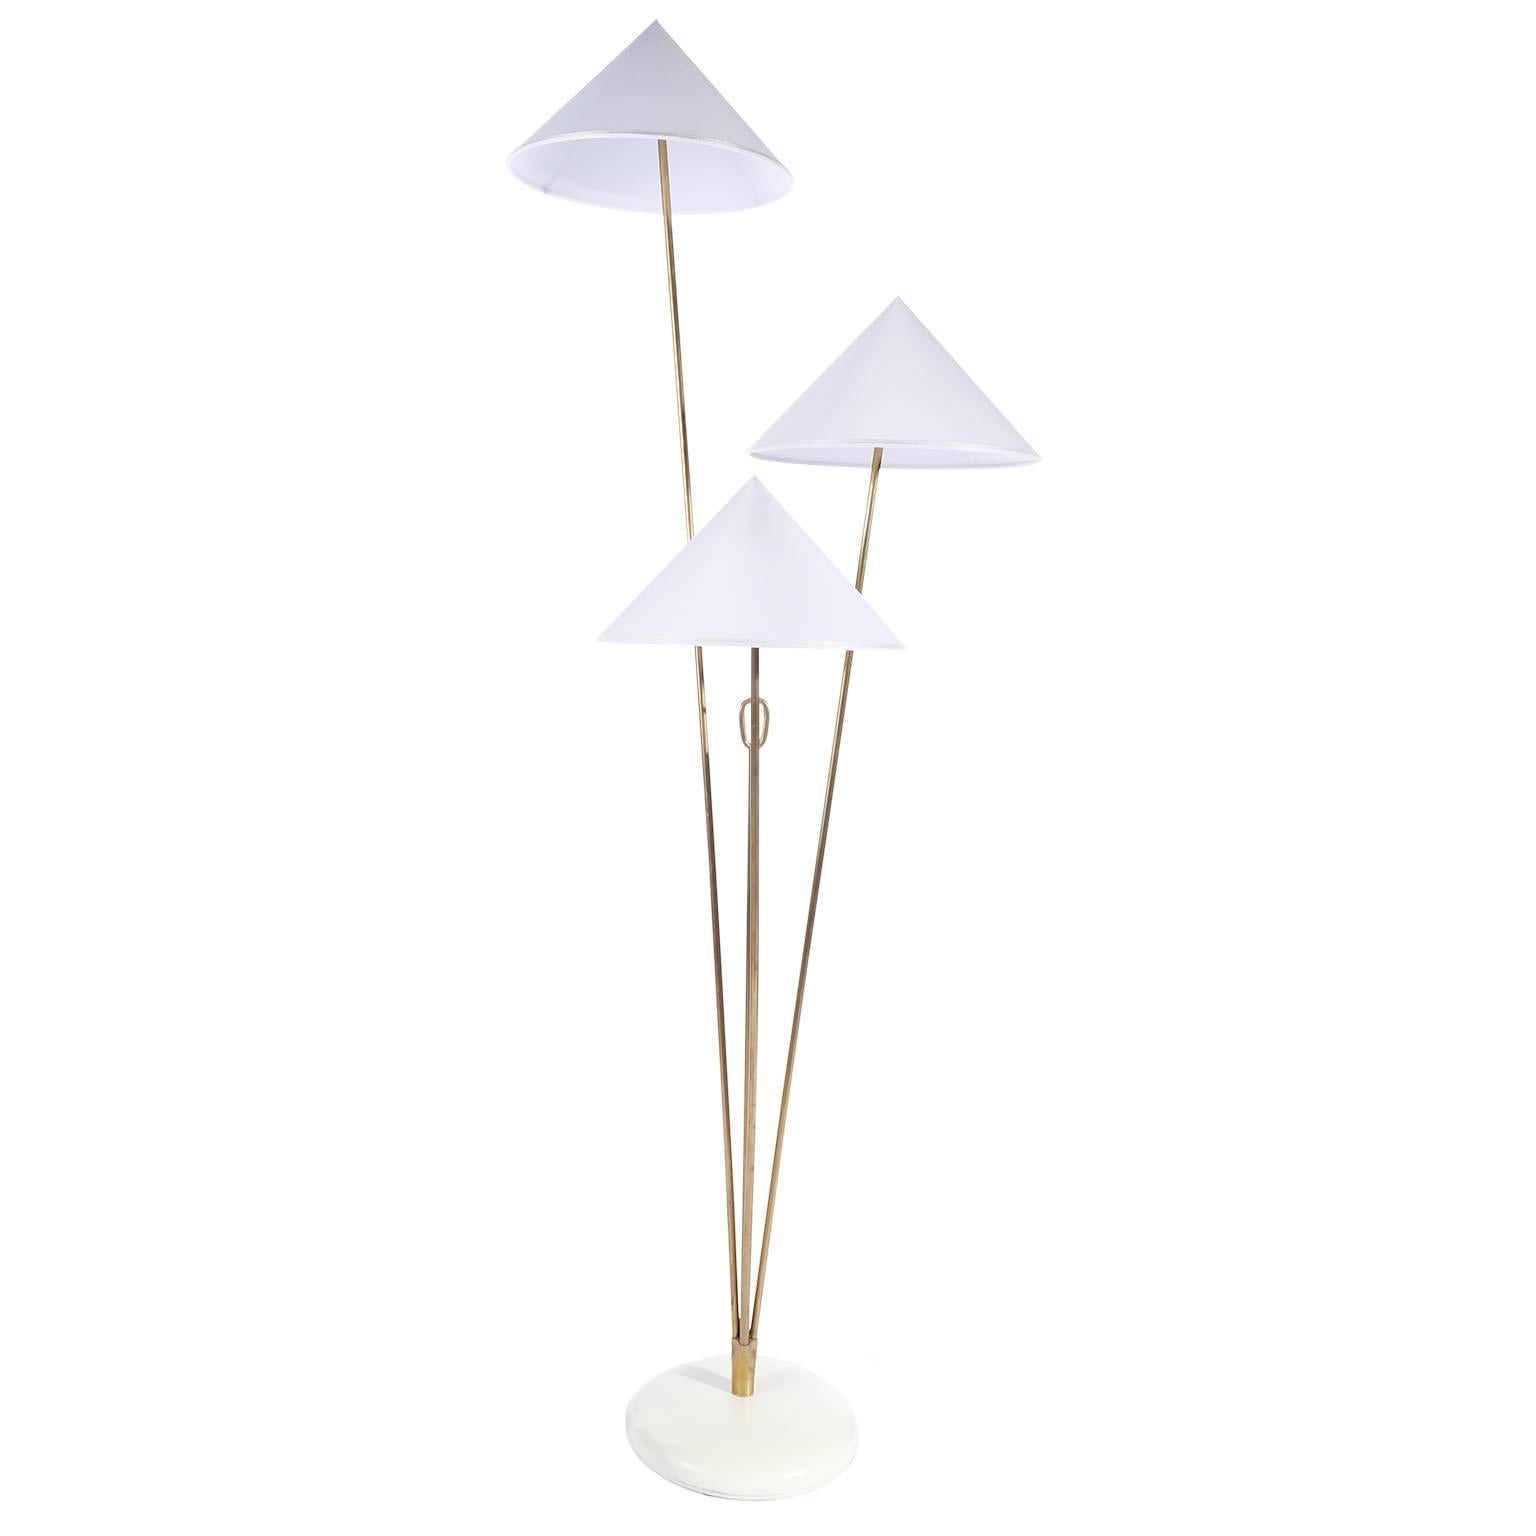 A brass floor lamp with cone shaped lampshades by Rupert Nikoll, Vienna, Austria, manufactured in midcentury, circa 1960 (late 1950s or early 1960s). 
The stand is made of three brass rods in different lengths, a shorter brass rod with a handle, and